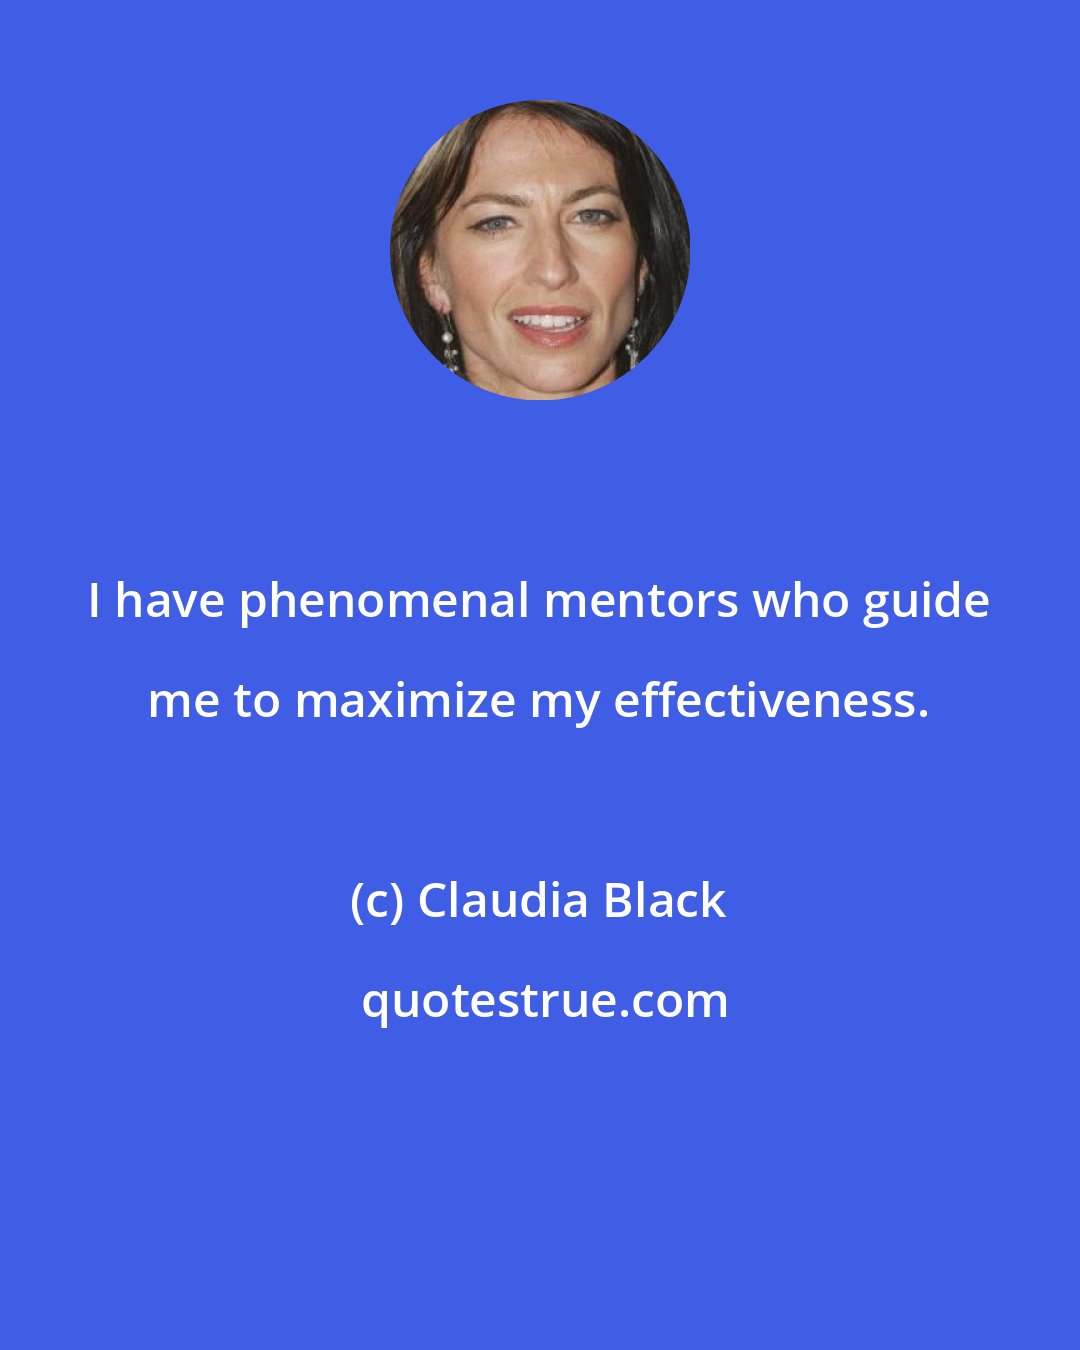 Claudia Black: I have phenomenal mentors who guide me to maximize my effectiveness.